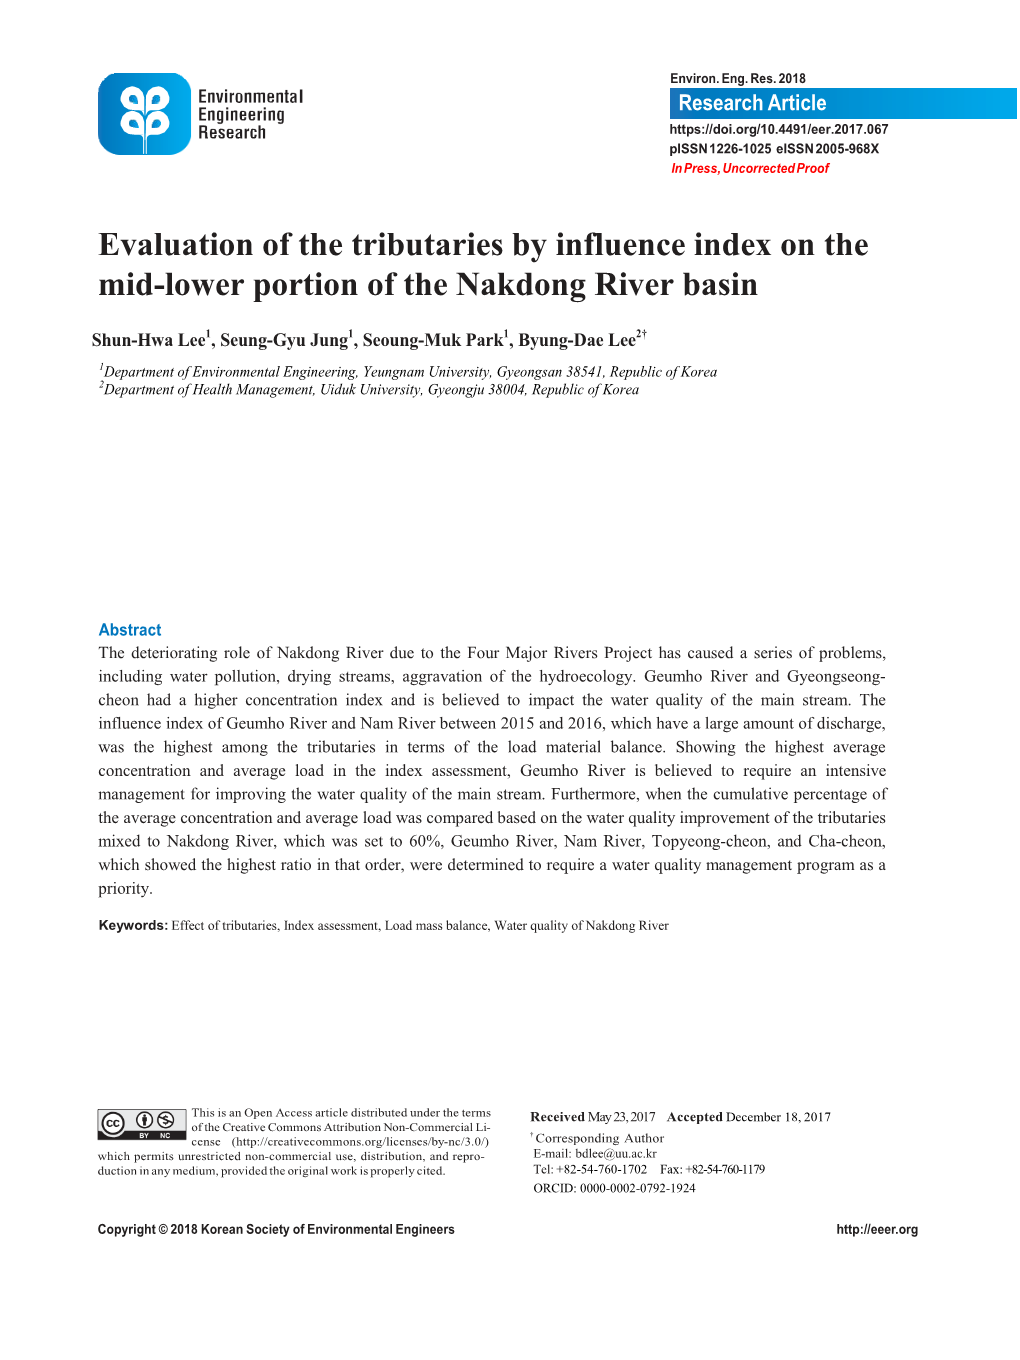 Evaluation of the Tributaries by Influence Index on the Mid-Lower Portion of the Nakdong River Basin